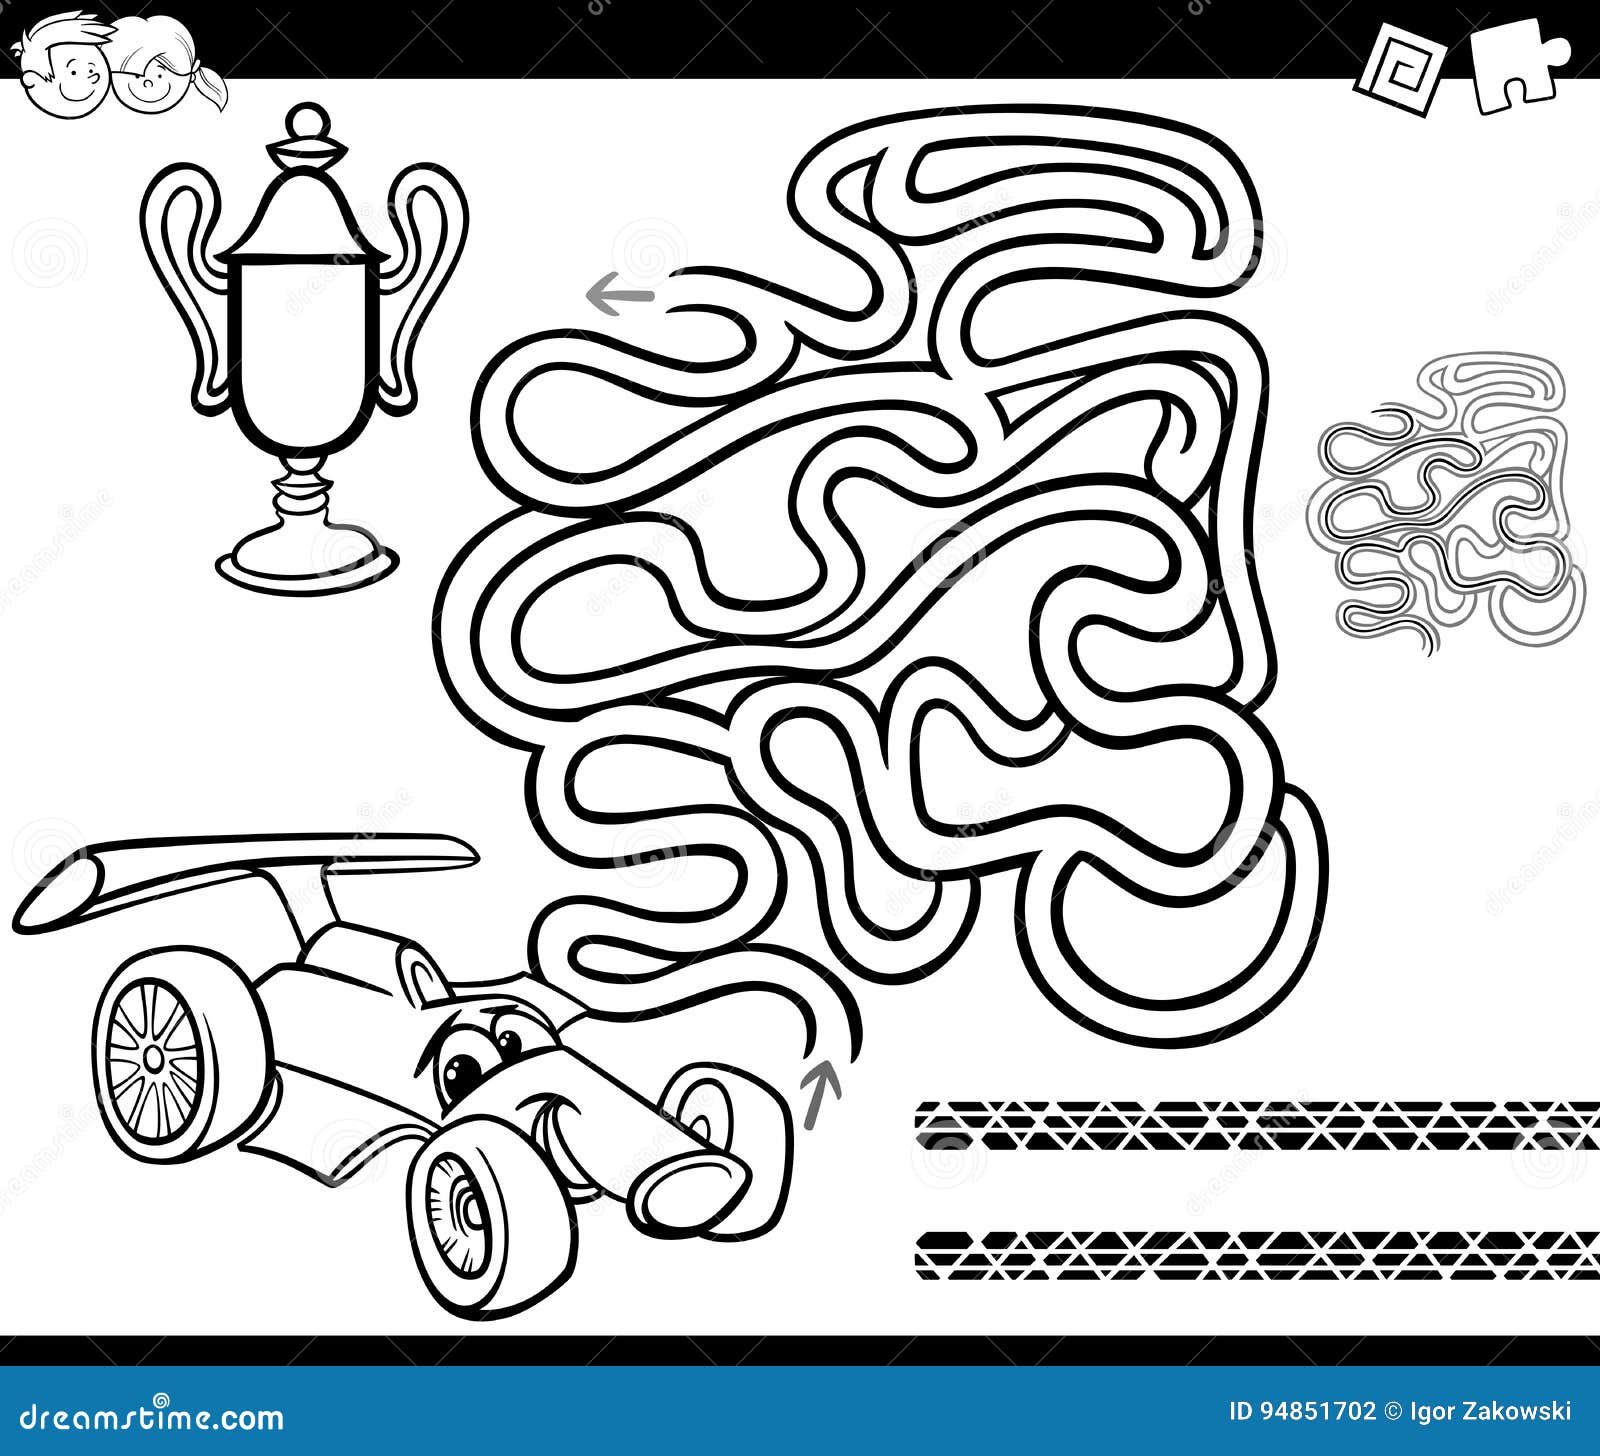 Maze with race car coloring page stock vector